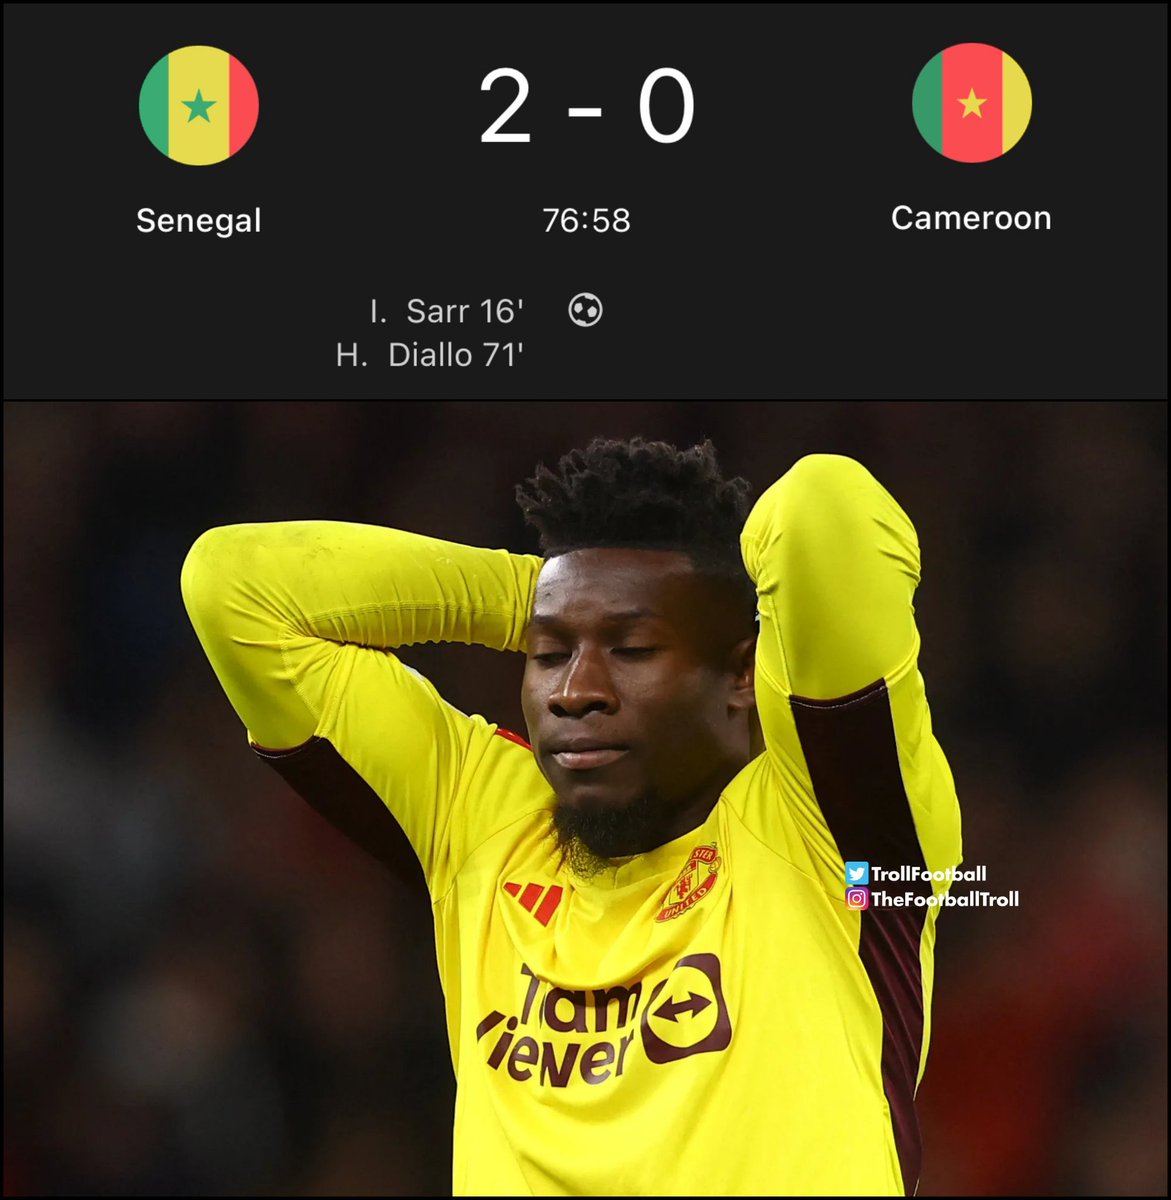 Onana delayed to fly for Afcon to play a game @ManUtd vs @SpursOfficial : Concede 2 Goals He joins Cameroon and Concede 2 goals What a consistent player